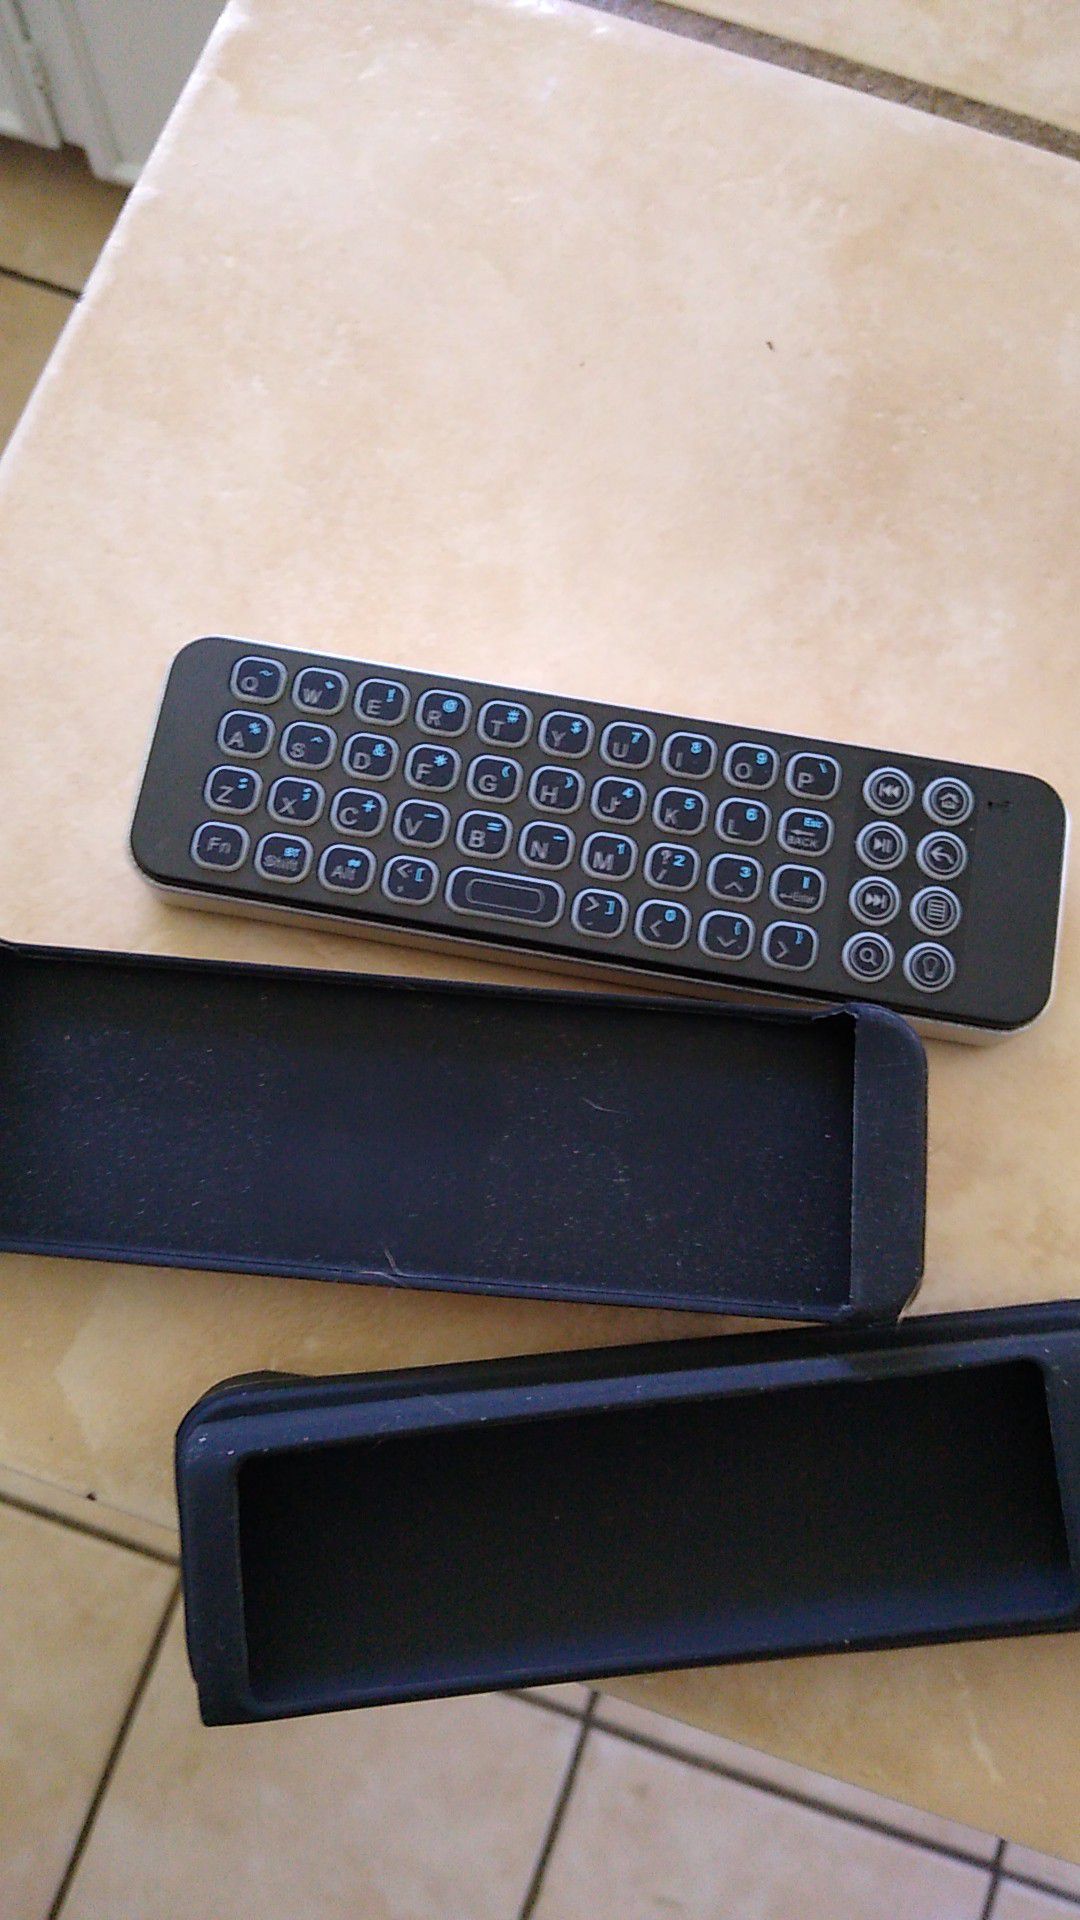 Bluetooth keyboard for fire tv